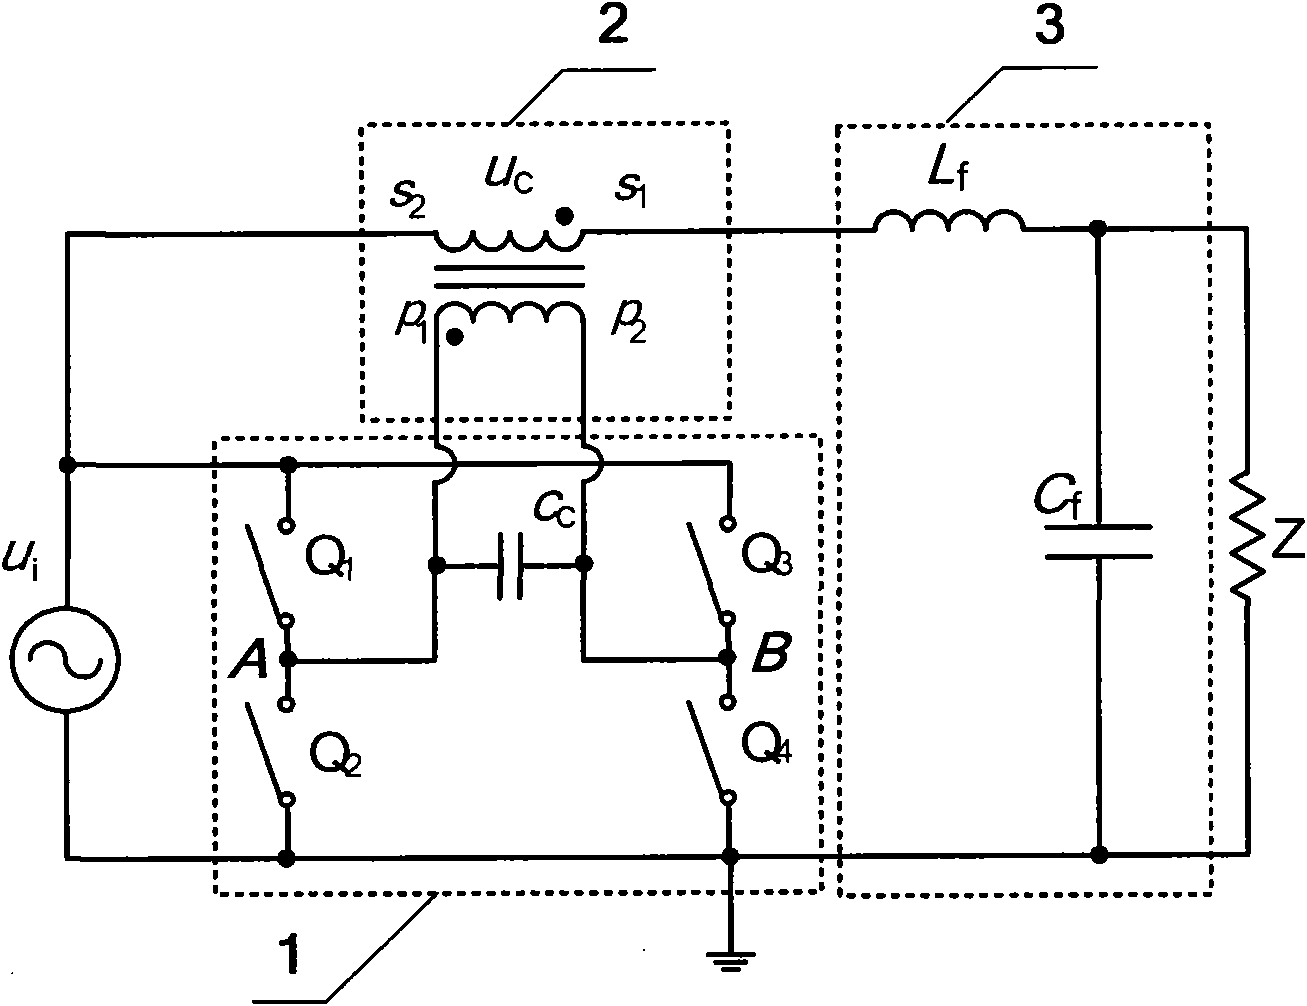 Serial power quality compensator based on alternating current (AC)/AC chopper